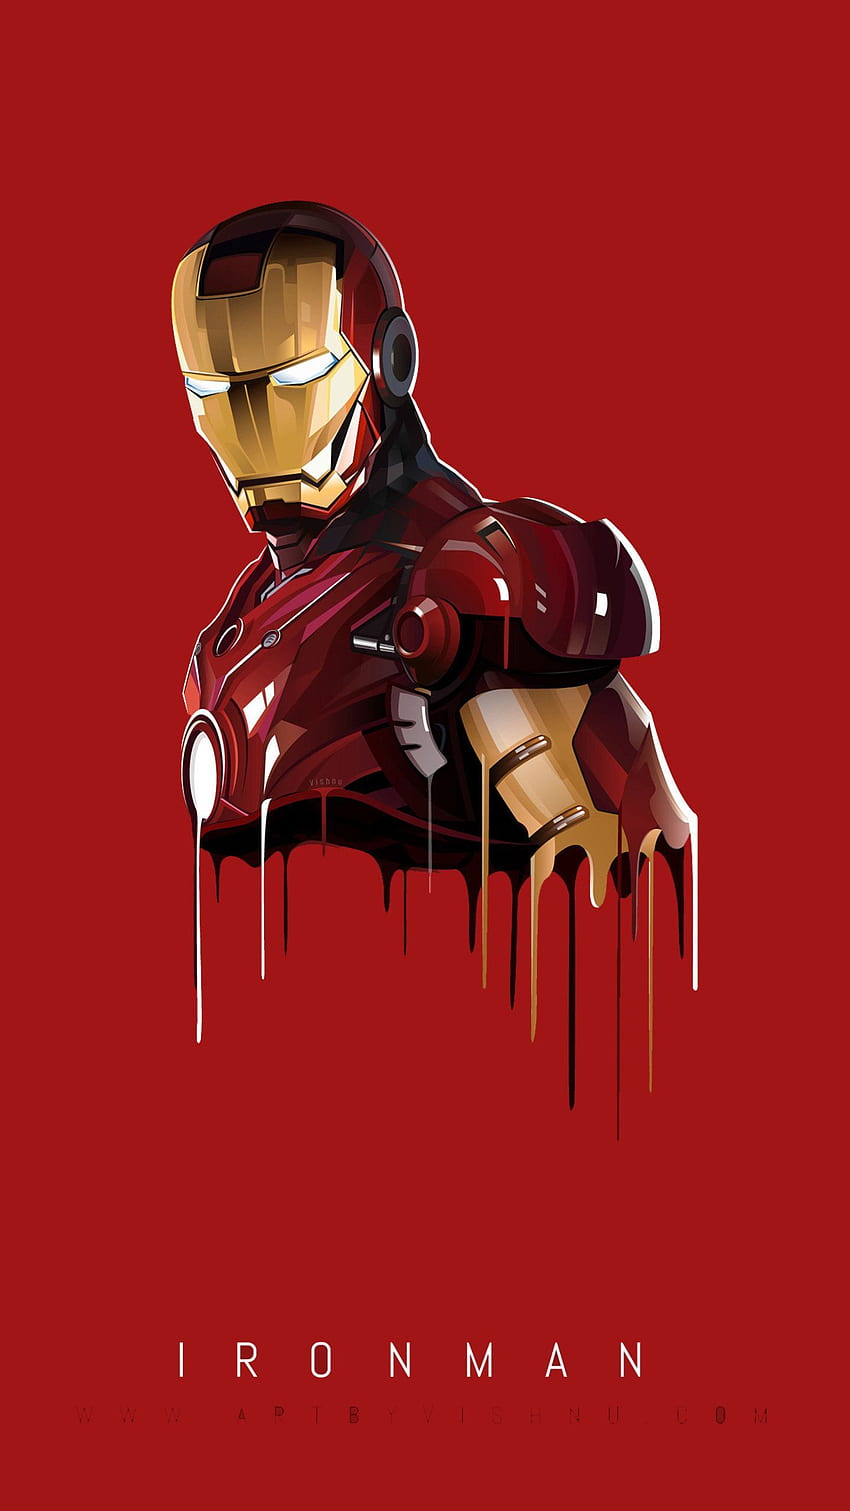 Cool Iron Man Wallpapers  Top 30 Best Cool Iron Man Wallpapers Download